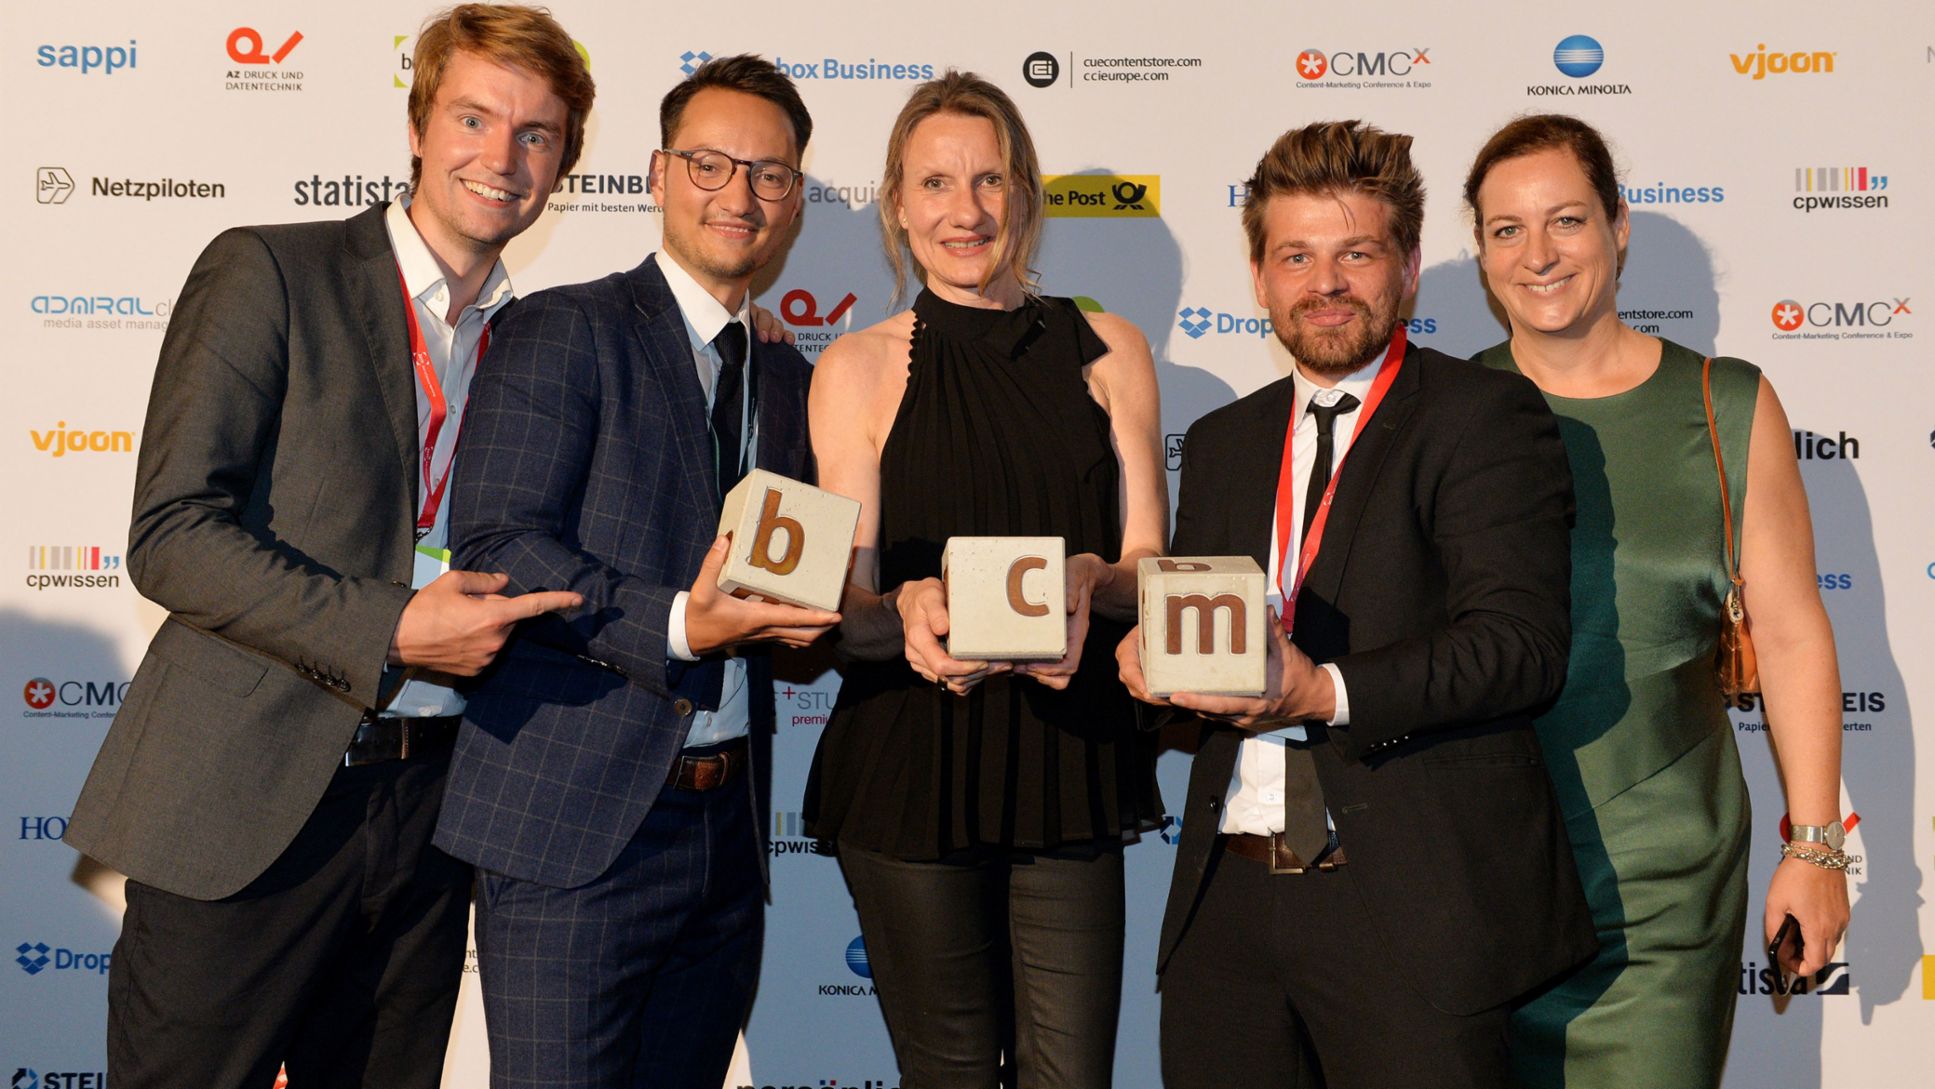 Pascal Schulze-Bisping, Project Management Porsche Newsroom Porsche AG, Julian Hoffmann, Editorial Management Porsche Newsroom Porsche AG, Sabine Schröder, Director Corporate Publishing Porsche AG, Till Uhrig, Editor TERRITORY Content to Results GmbH, Sandra Harzer-Kux, CEO TERRITORY Content to Results GmbH, l-r, BCM Award, awards show, Berlin, 2017, Porsche AG